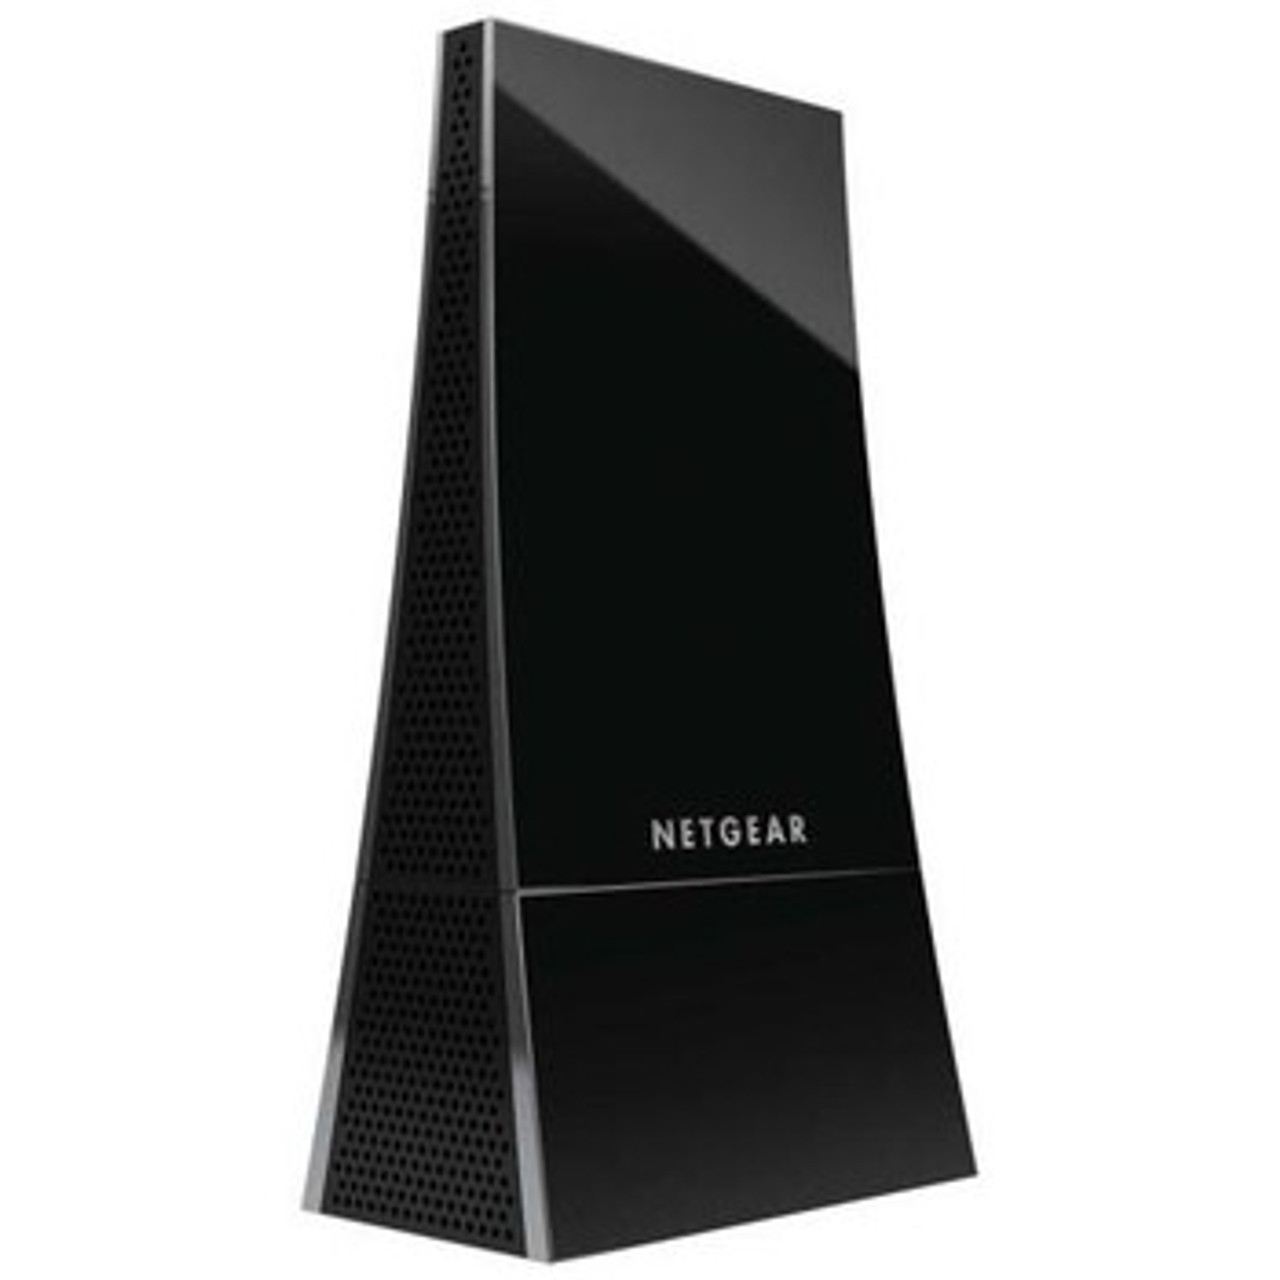 WNCE3001-100PES | NetGear | Universal Dual Band Wireless Internet Adapter for Smart TV and Blu-ray